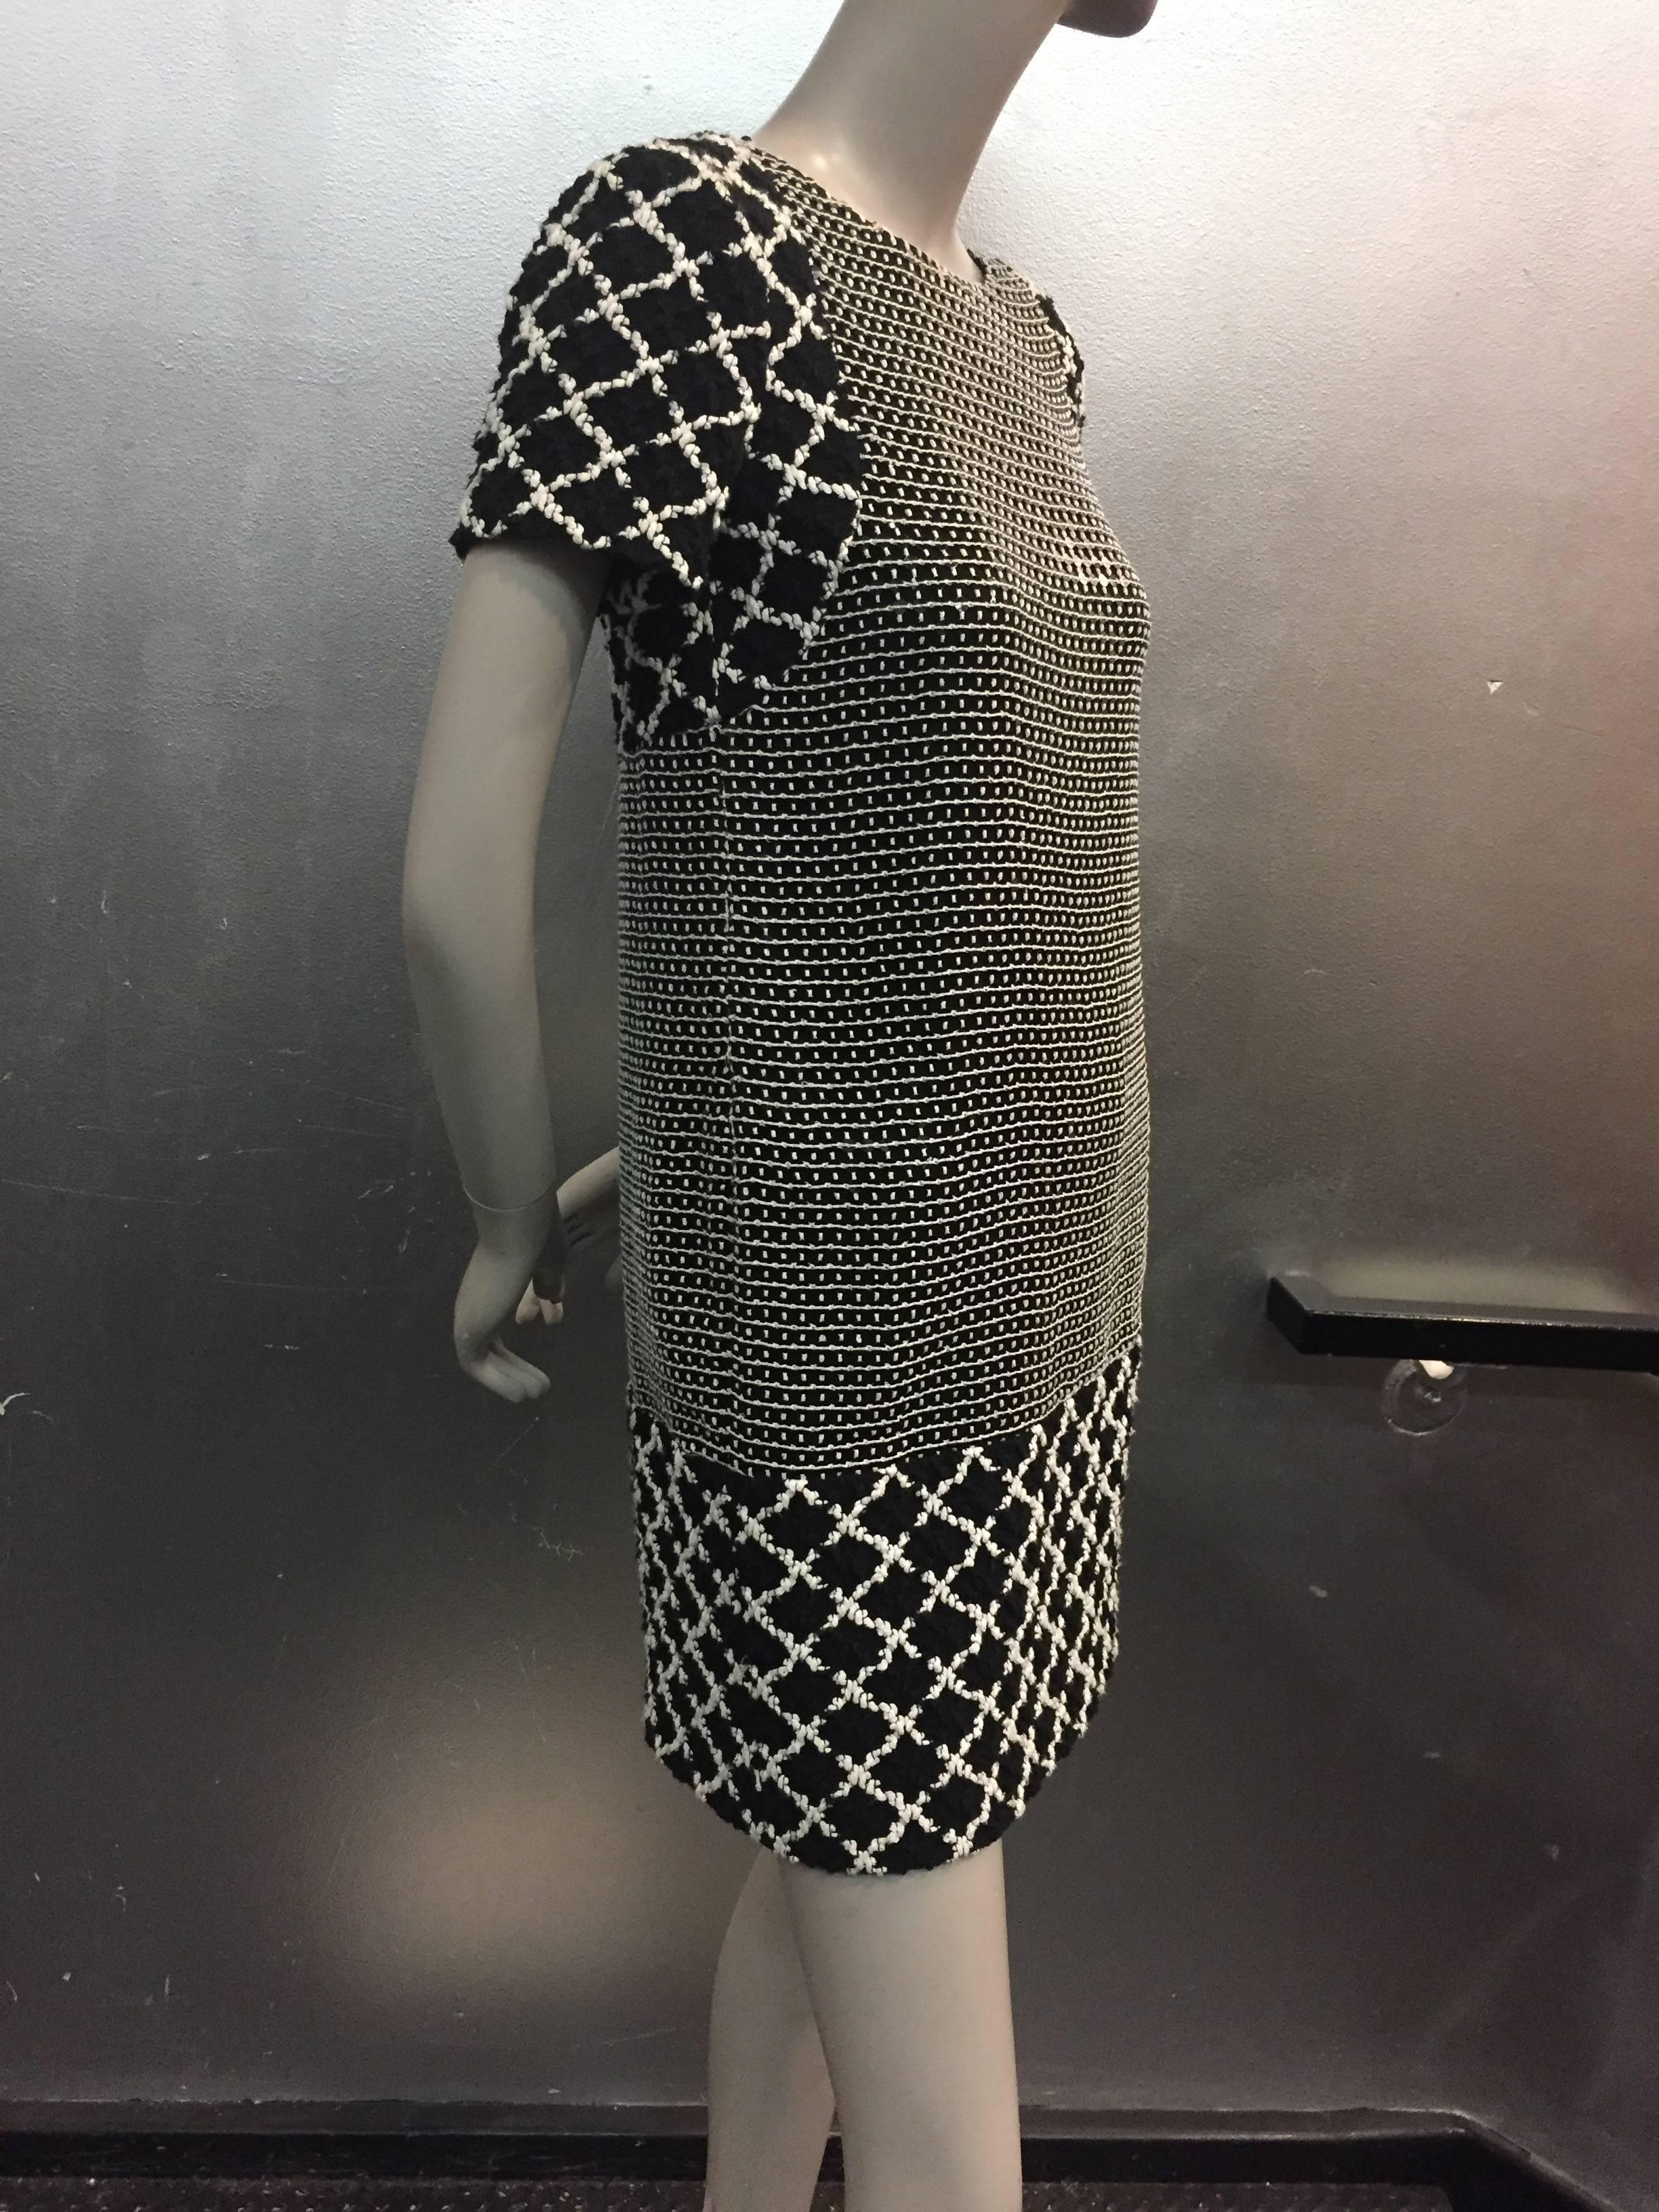 A true classic Chanel black and white cap sleeved mini ...easy to wear and no fuss.

Cotton window pane cap sleeve and hem.

Center panel is sequined on woven net, soft and light weight.

Fully lined and zips up the back.

Tres Chic